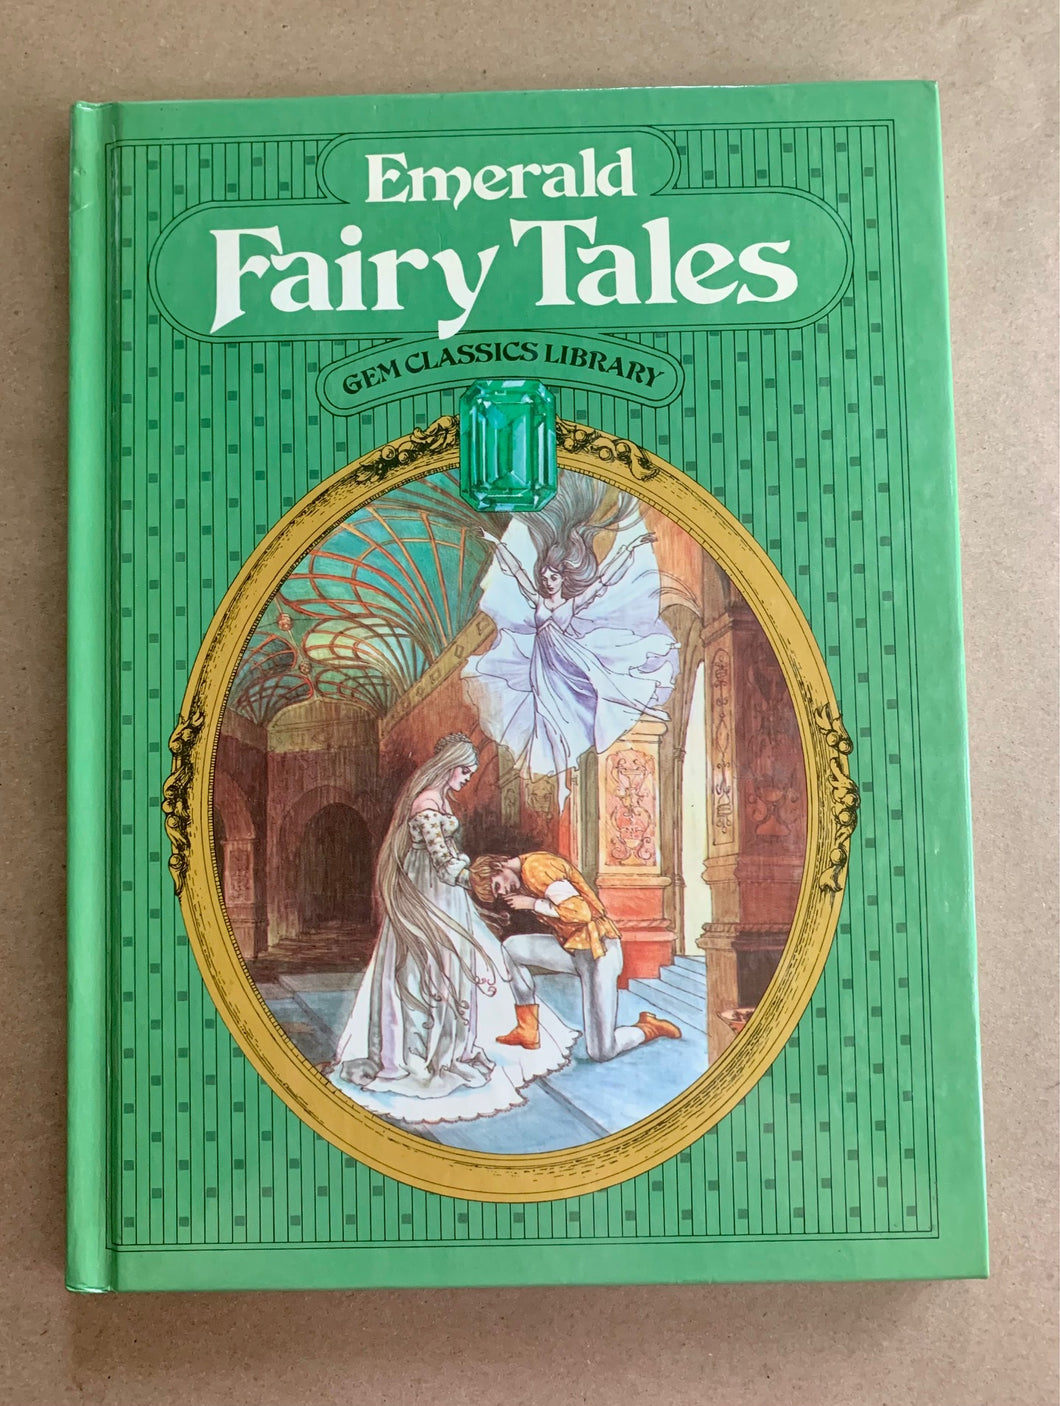 Emerald Fairy Tales Gem Classics Library Illustrated Vintage Jane Carruth Book